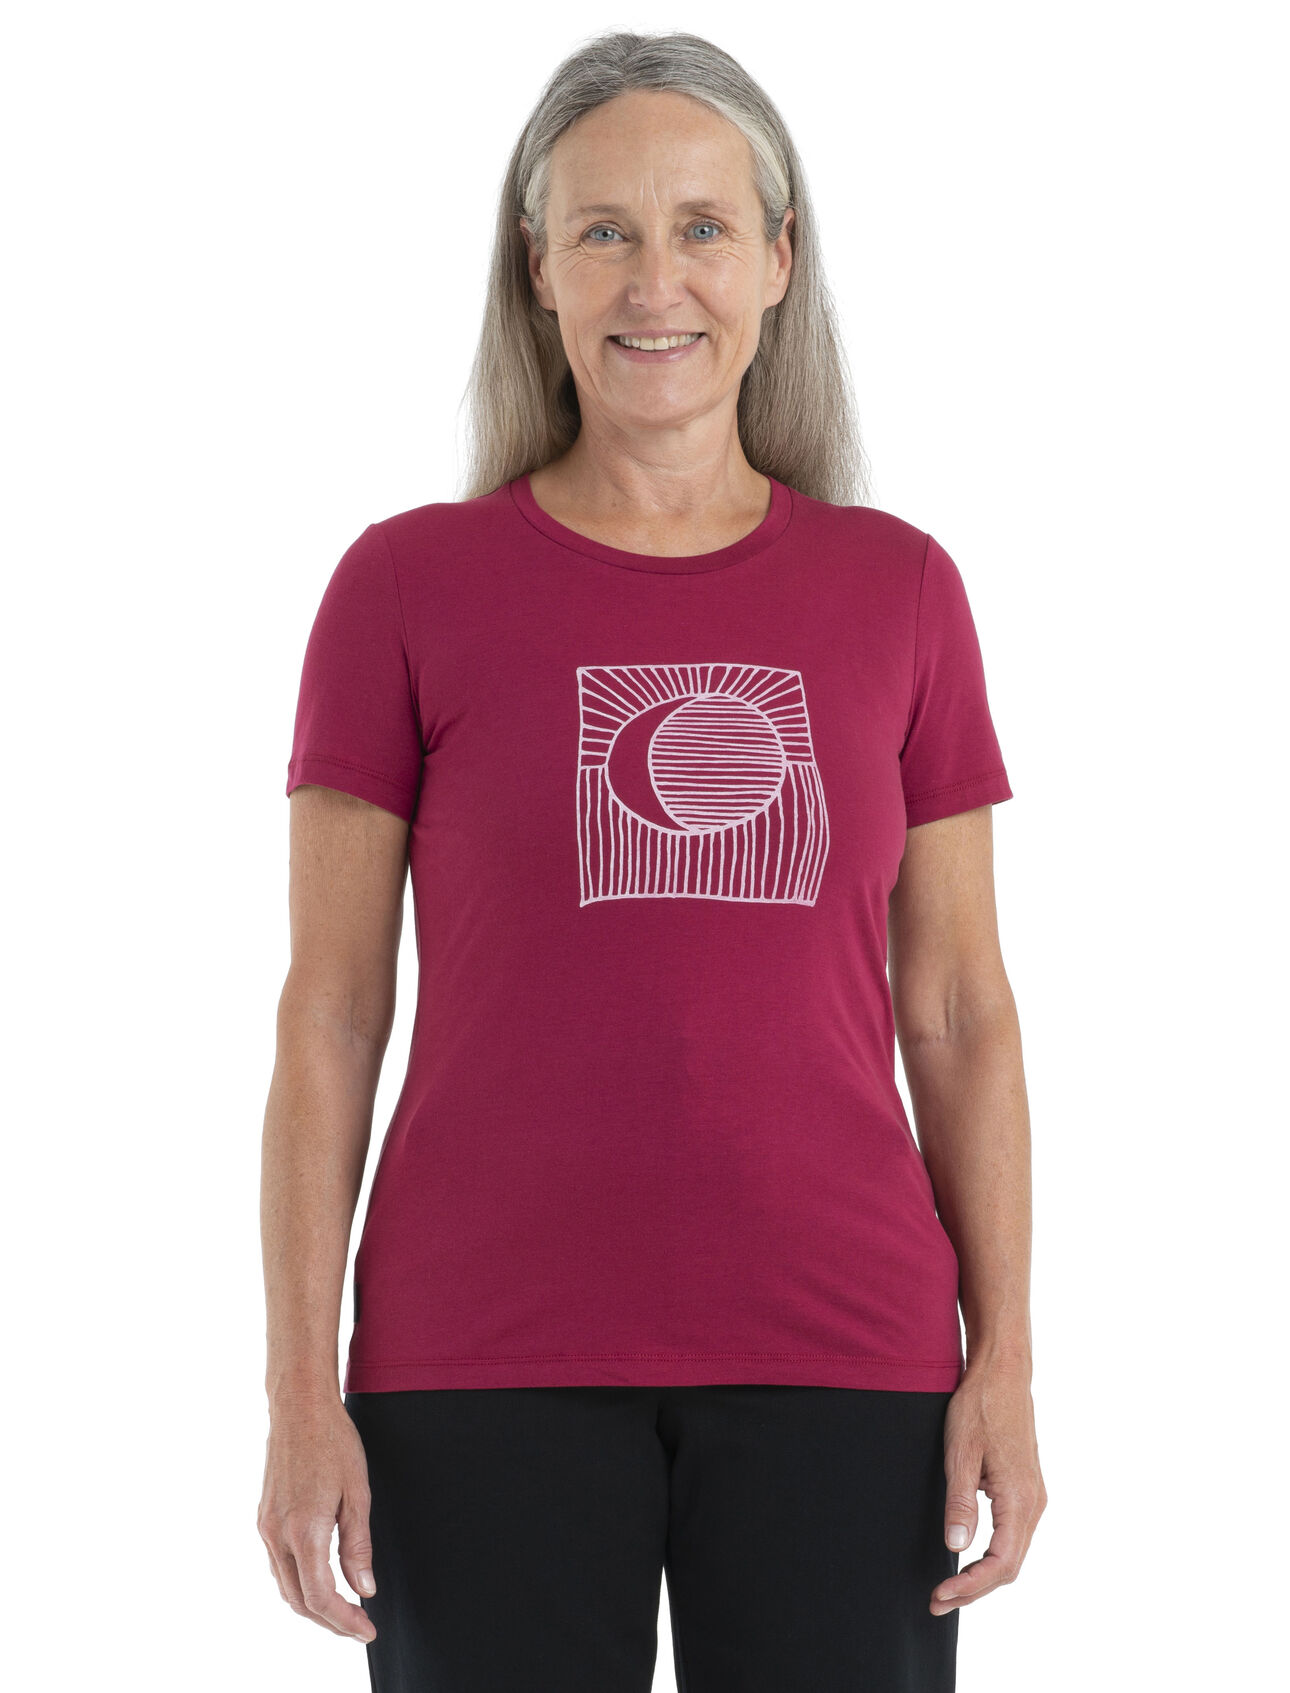 Womens Tencel™ Cotton Short Sleeve T-Shirt Nature’s Orb A clean and comfortable everyday tee with classic style and a blend of natural fibres, the Tencel Cotton Short Sleeve Tee Nature's Orb features a super-soft jersey fabric that combines organic cotton and TENCEL™. The original artwork draws inspiration from the power of the sun and moon. 